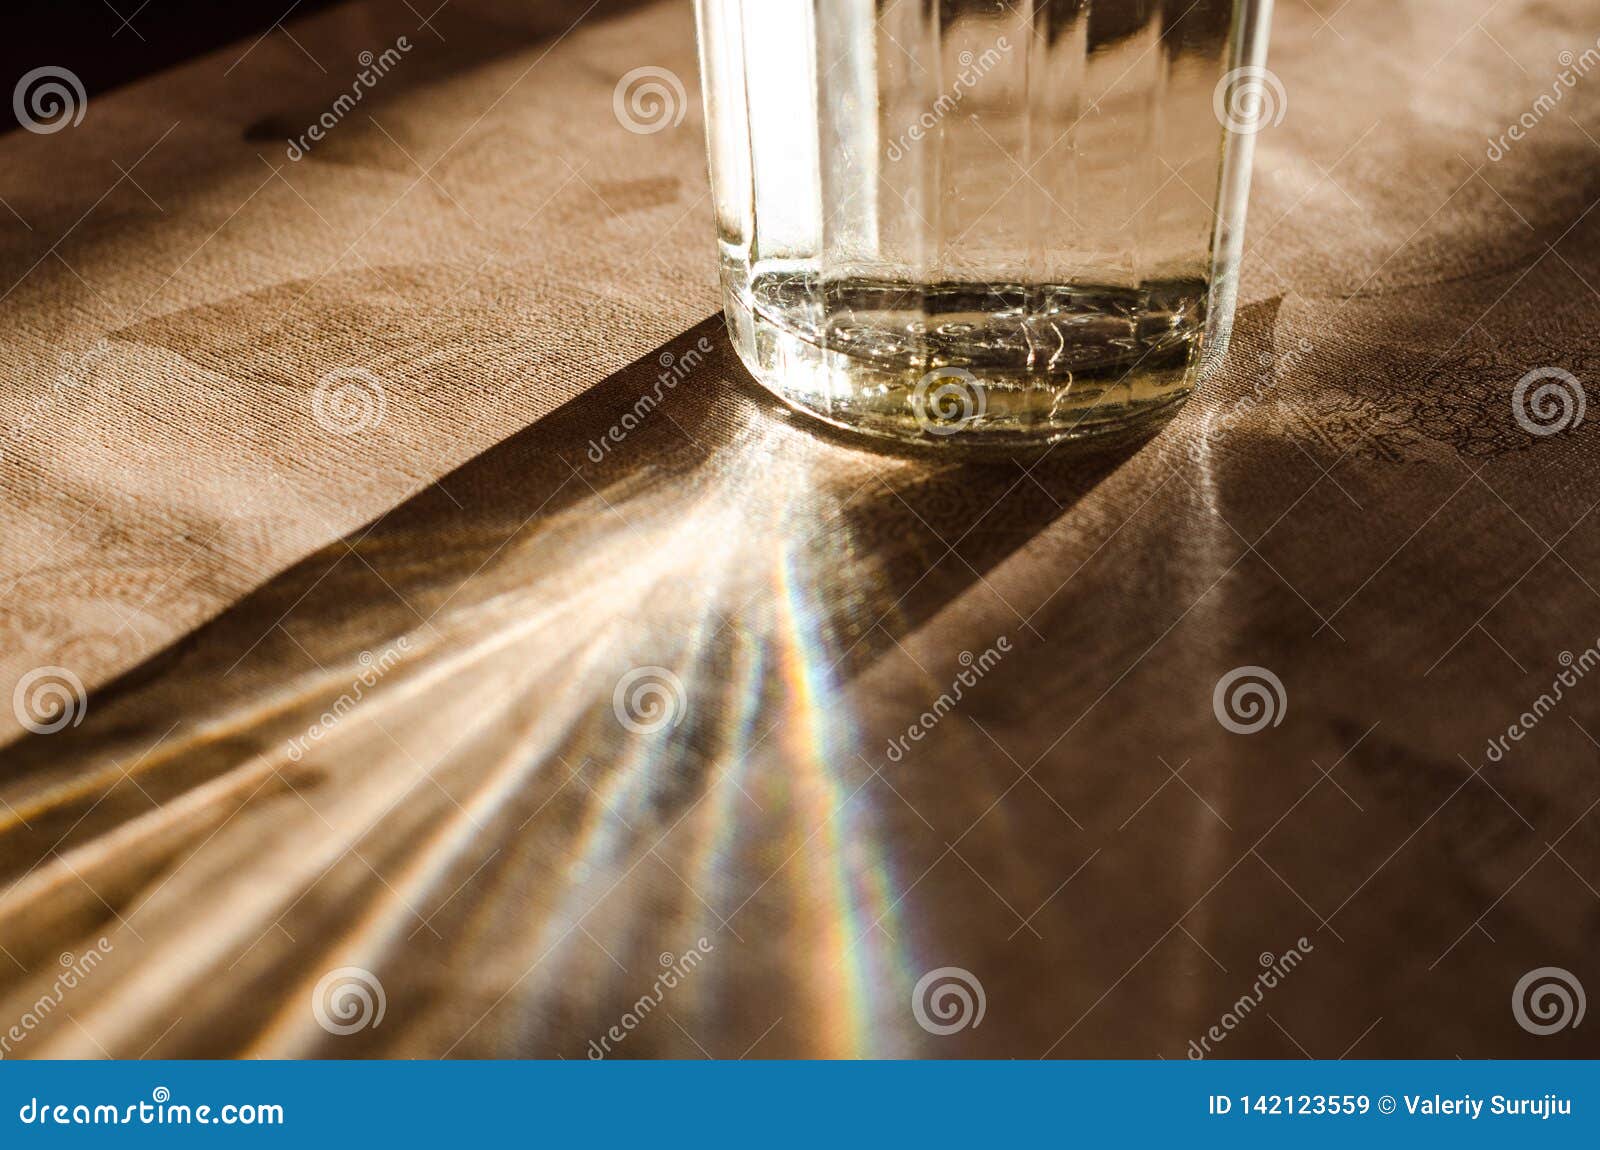 https://thumbs.dreamstime.com/z/glass-water-sunshine-sun-rays-selectively-focused-glass-water-kitchen-table-against-golden-morning-142123559.jpg